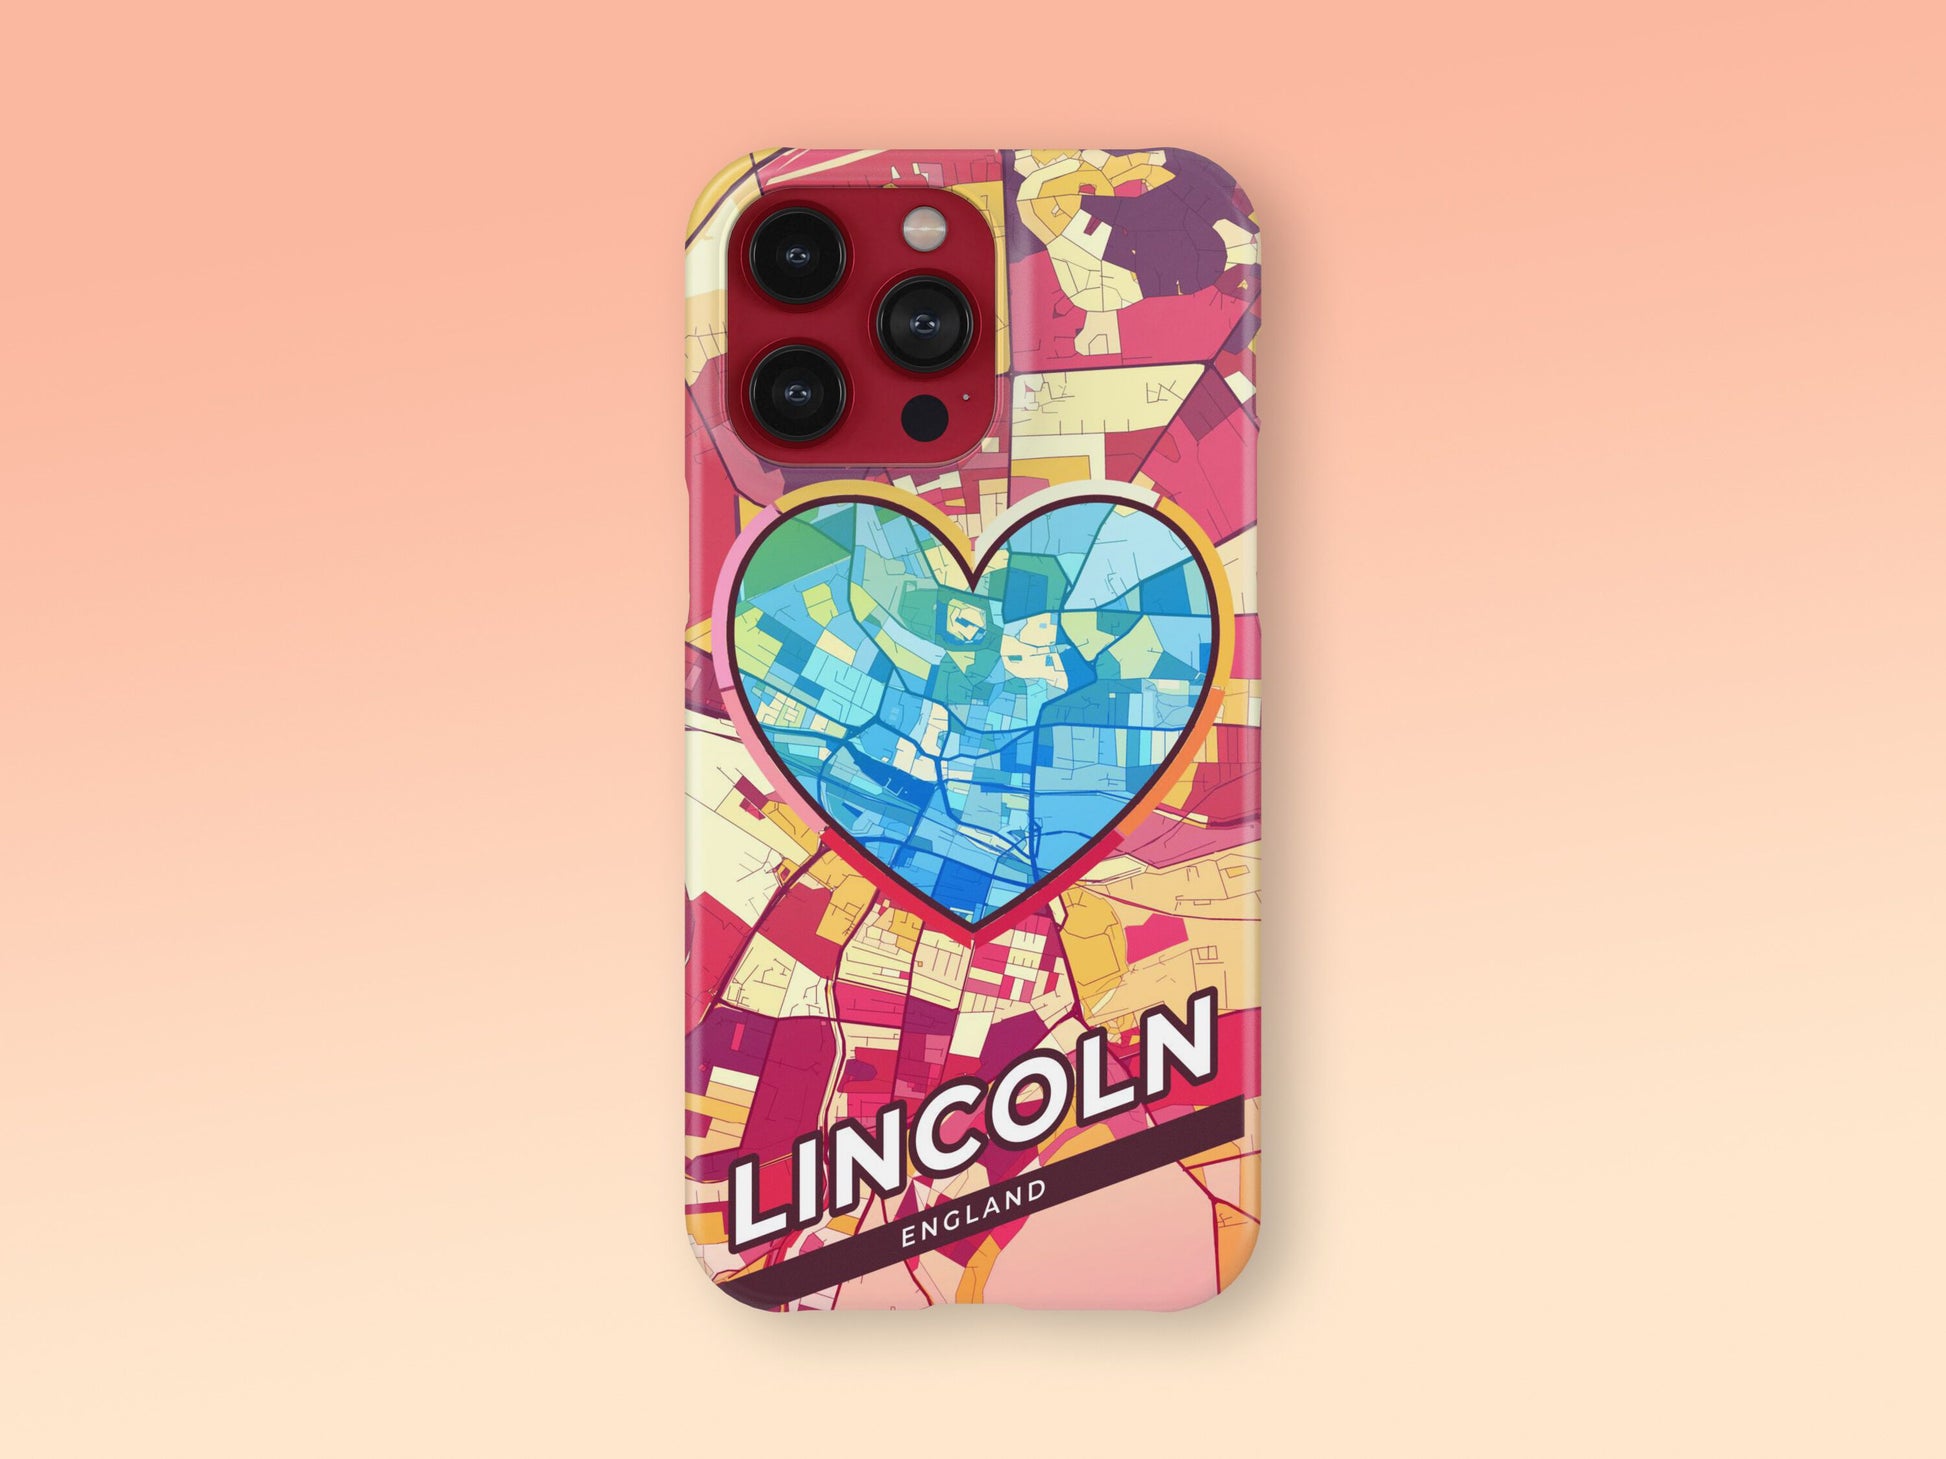 Lincoln England slim phone case with colorful icon. Birthday, wedding or housewarming gift. Couple match cases. 2